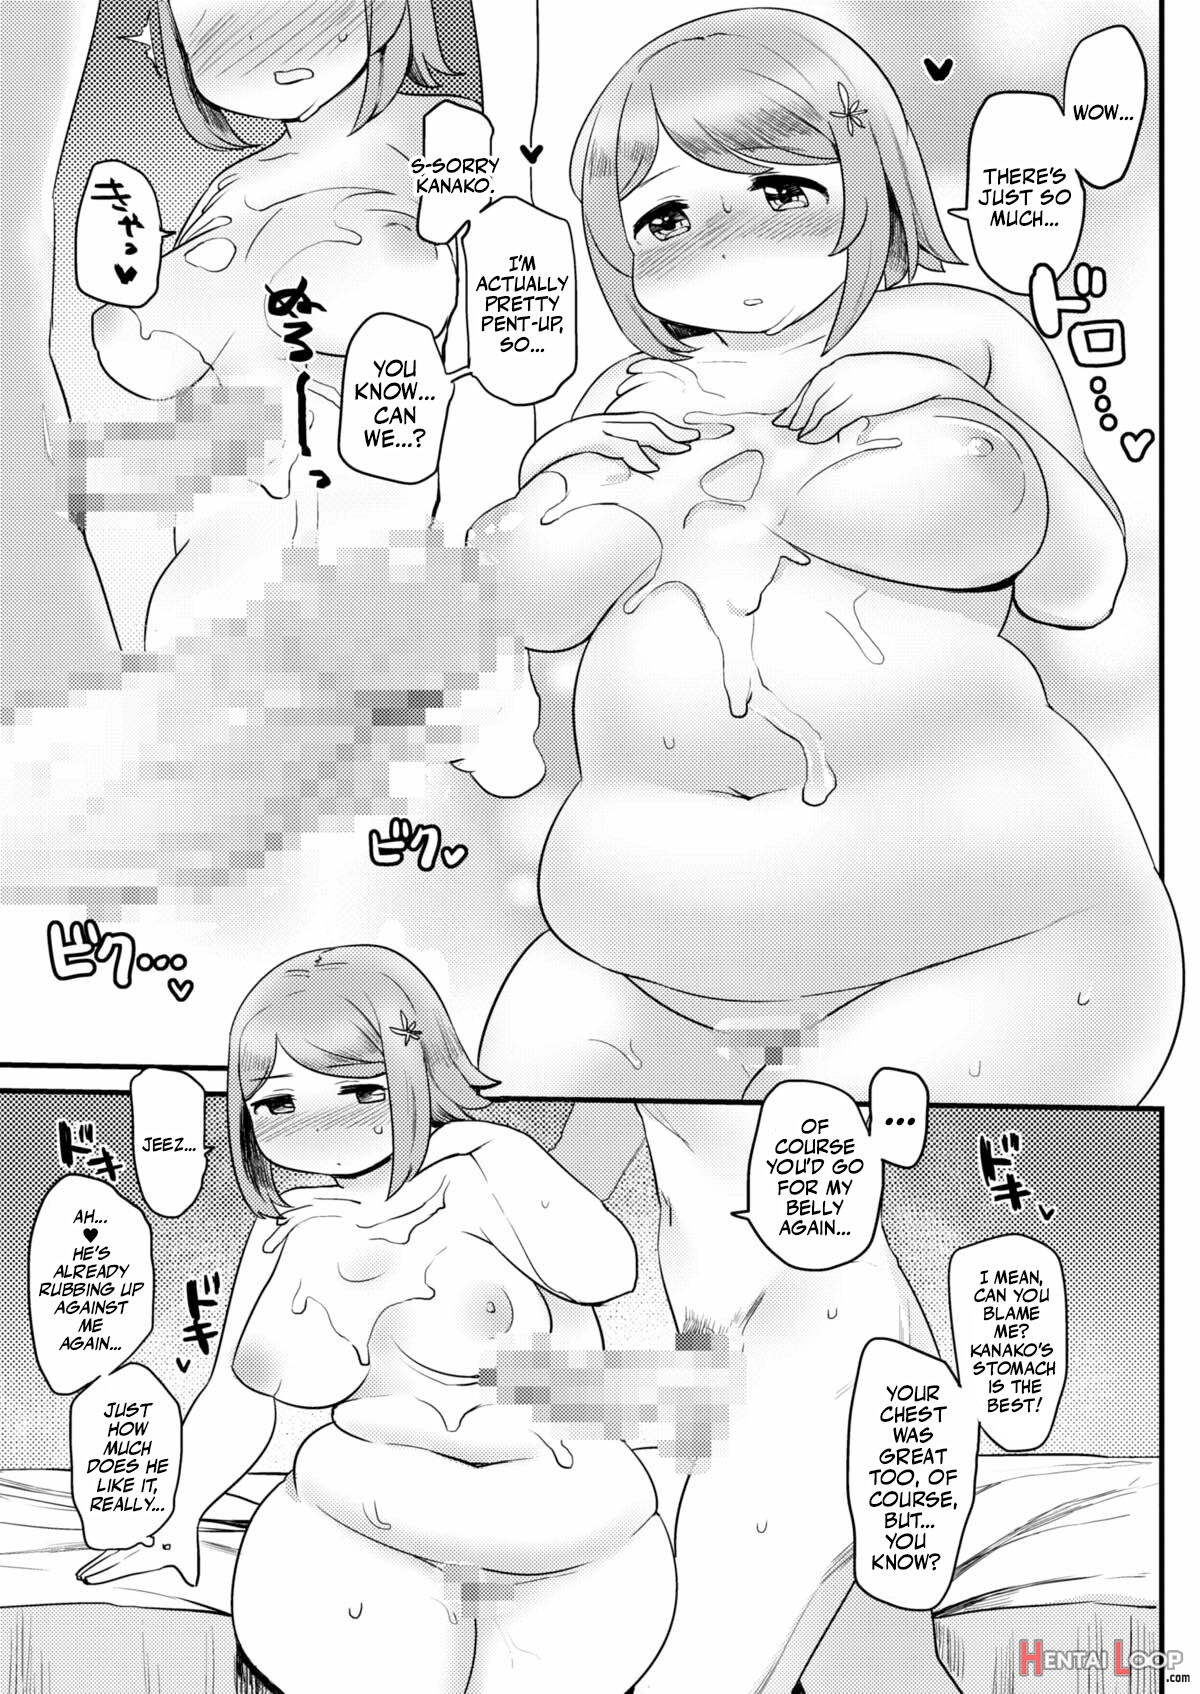 Kanako's Belly. page 10